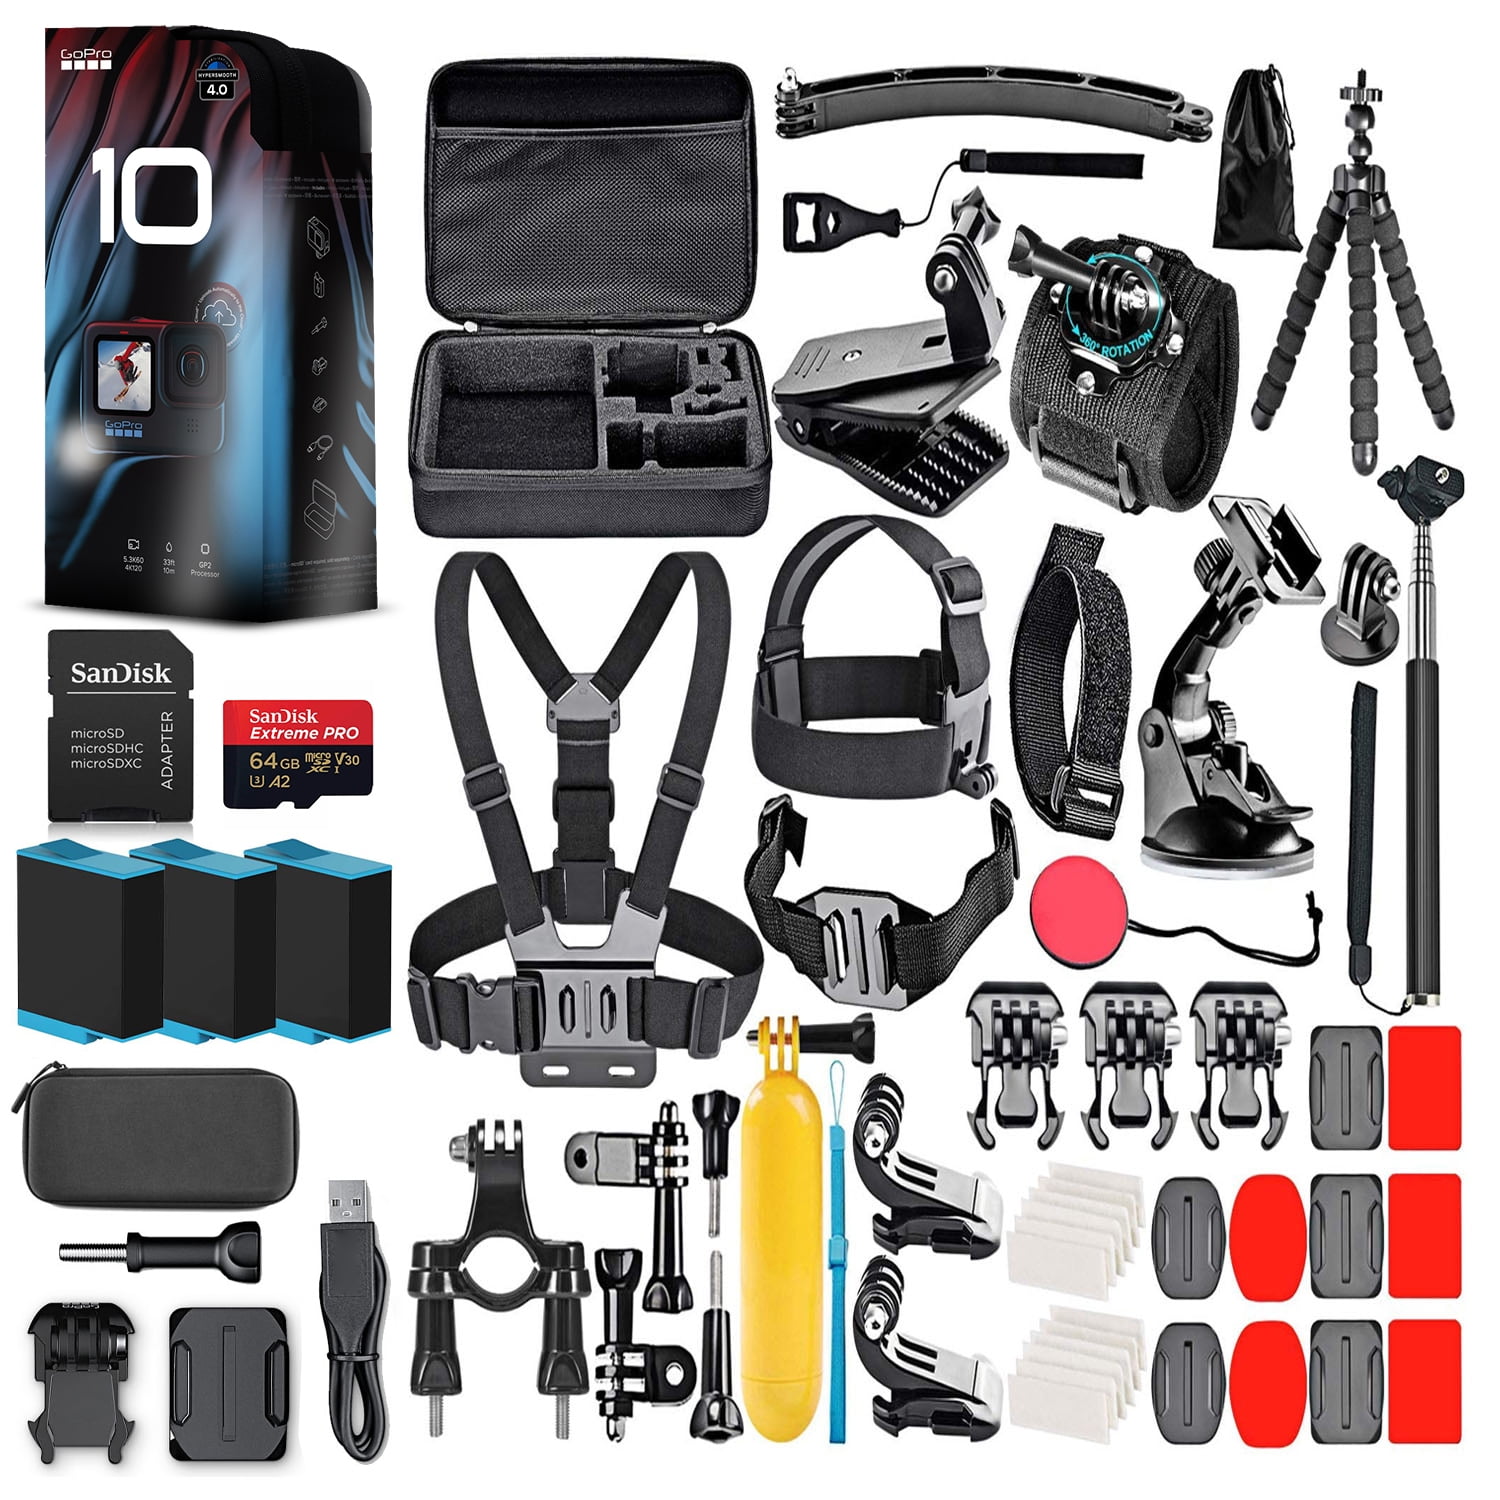 Live Streaming Stabilization with 50 Piece Accessory Kit Loaded Bundle Silver HERO7 Silver 4K Waterproof Action Camera Touch Screen 4K HD Video 10MP Photos GoPro 